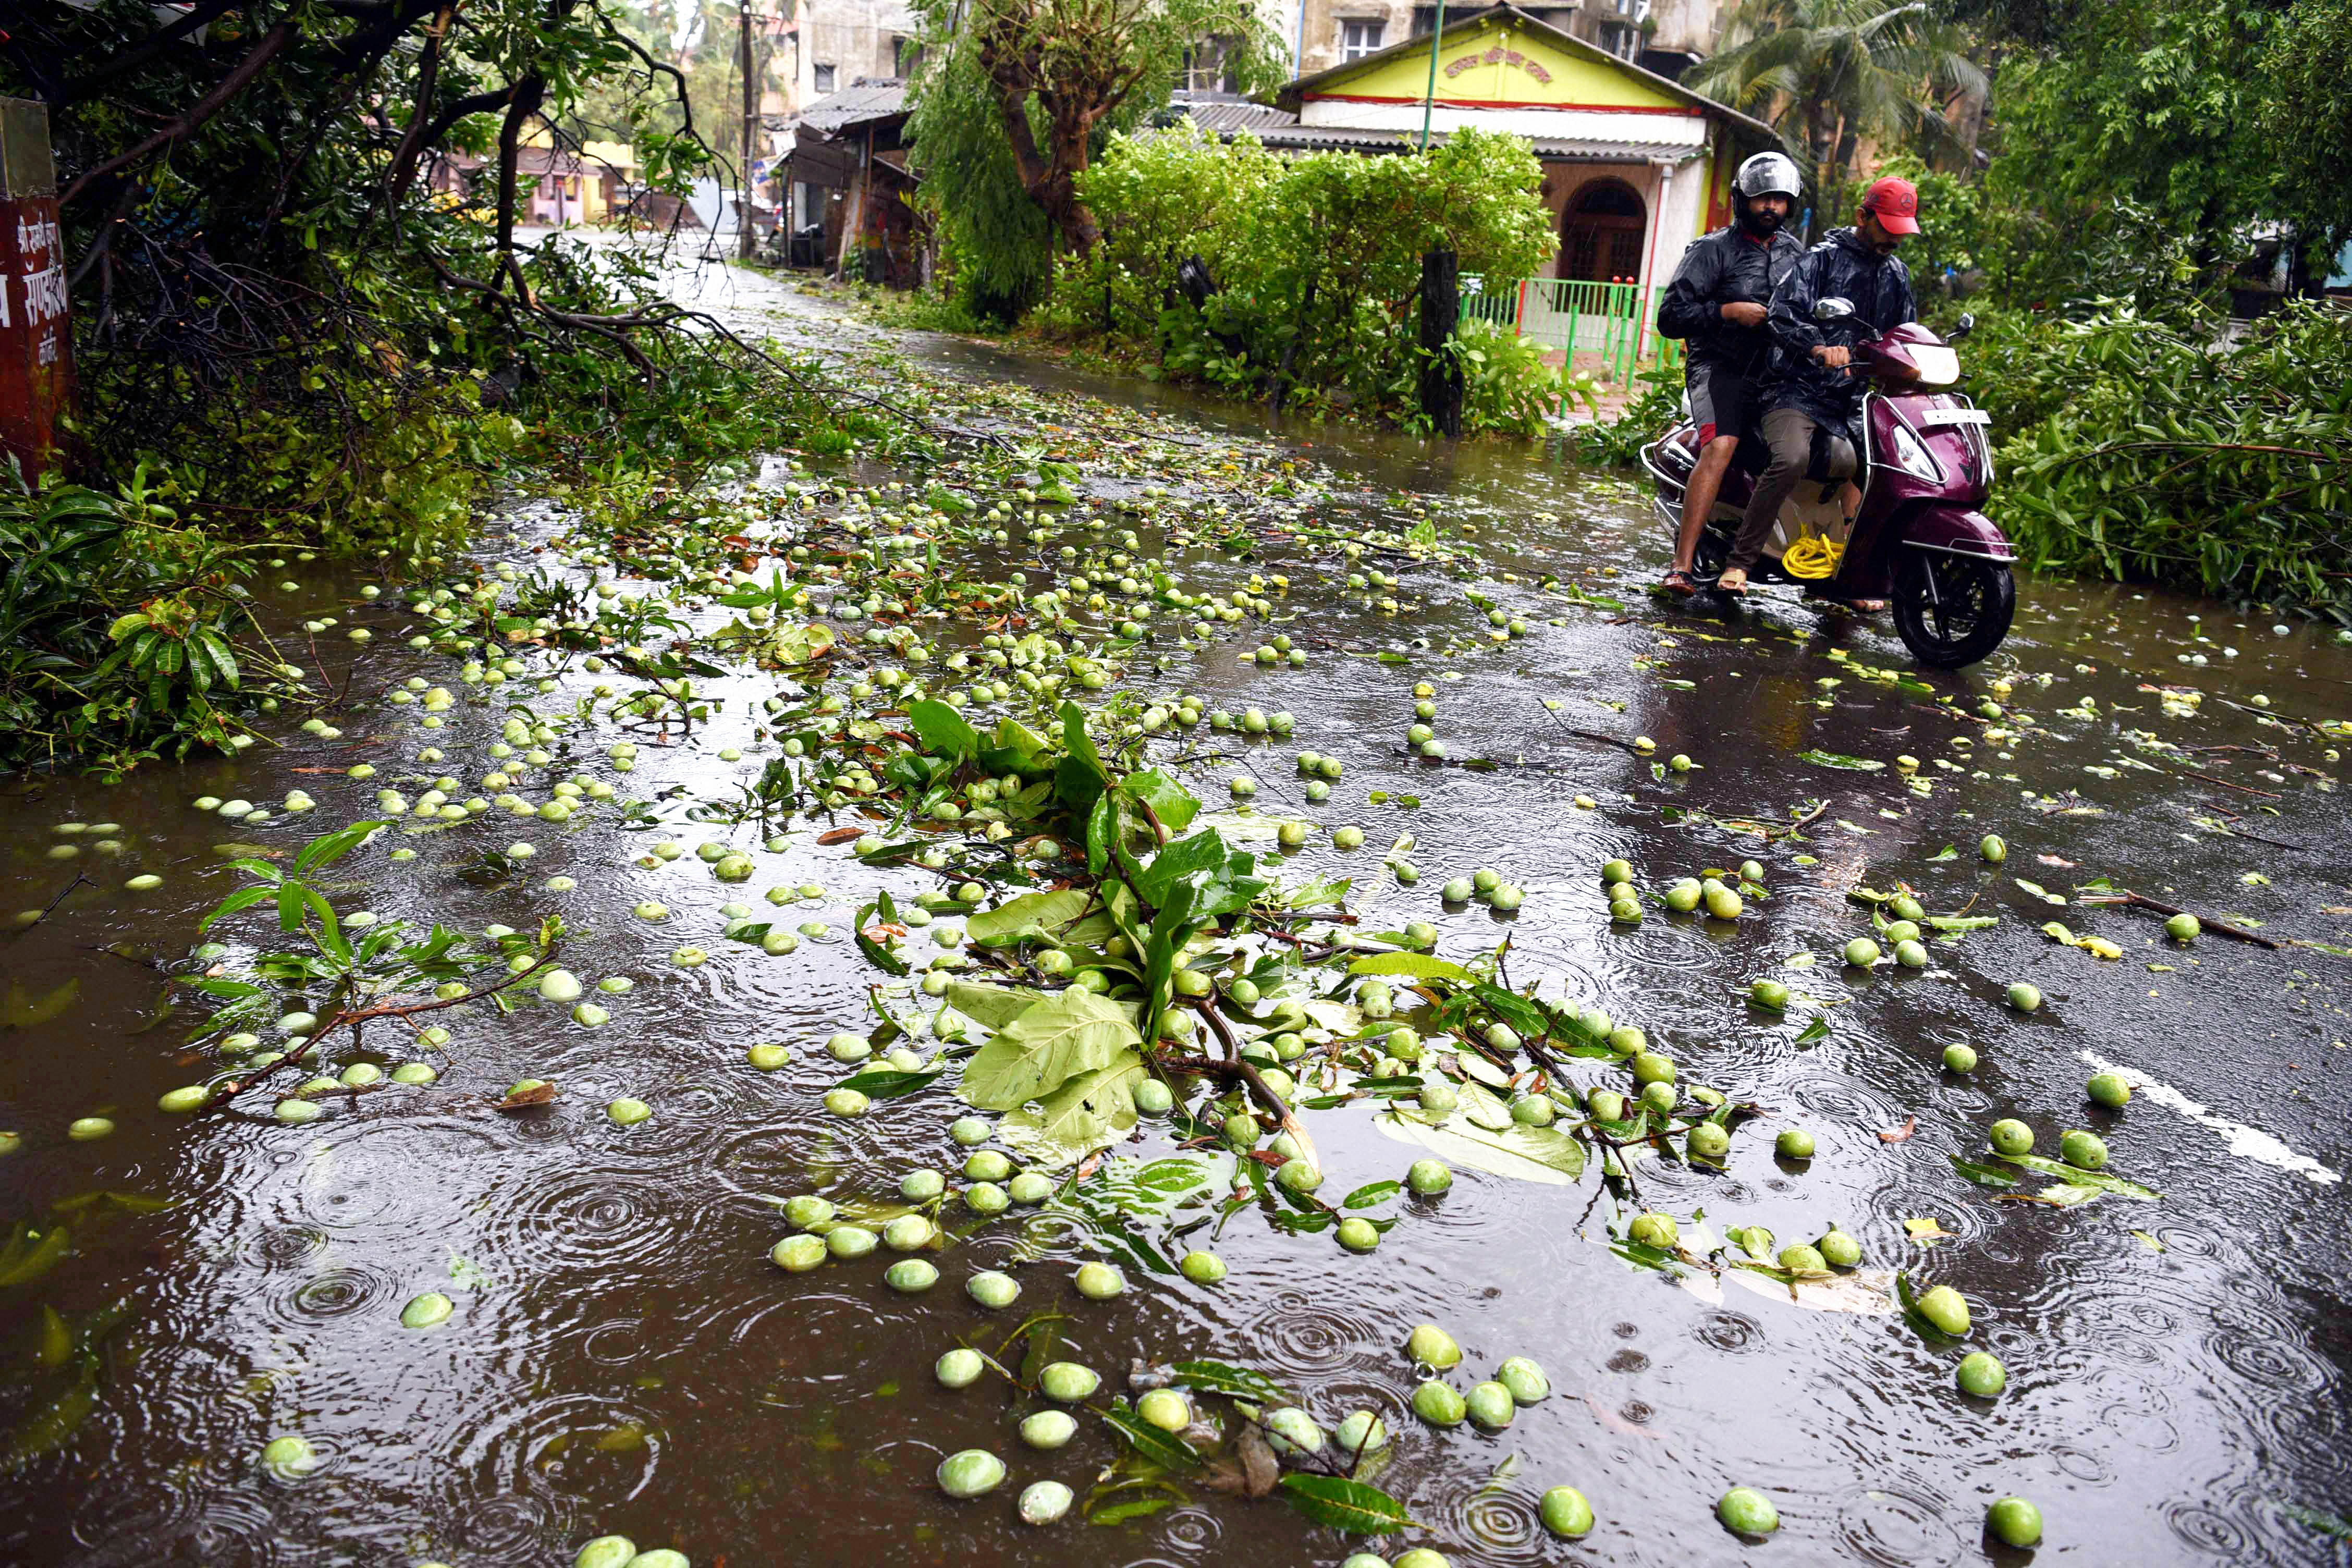  A scooterist rides on a road covered with fruits and branches fallen from trees during rains and strong winds triggered by Cyclone Nisarga, at Alibag. (PTI Photo)